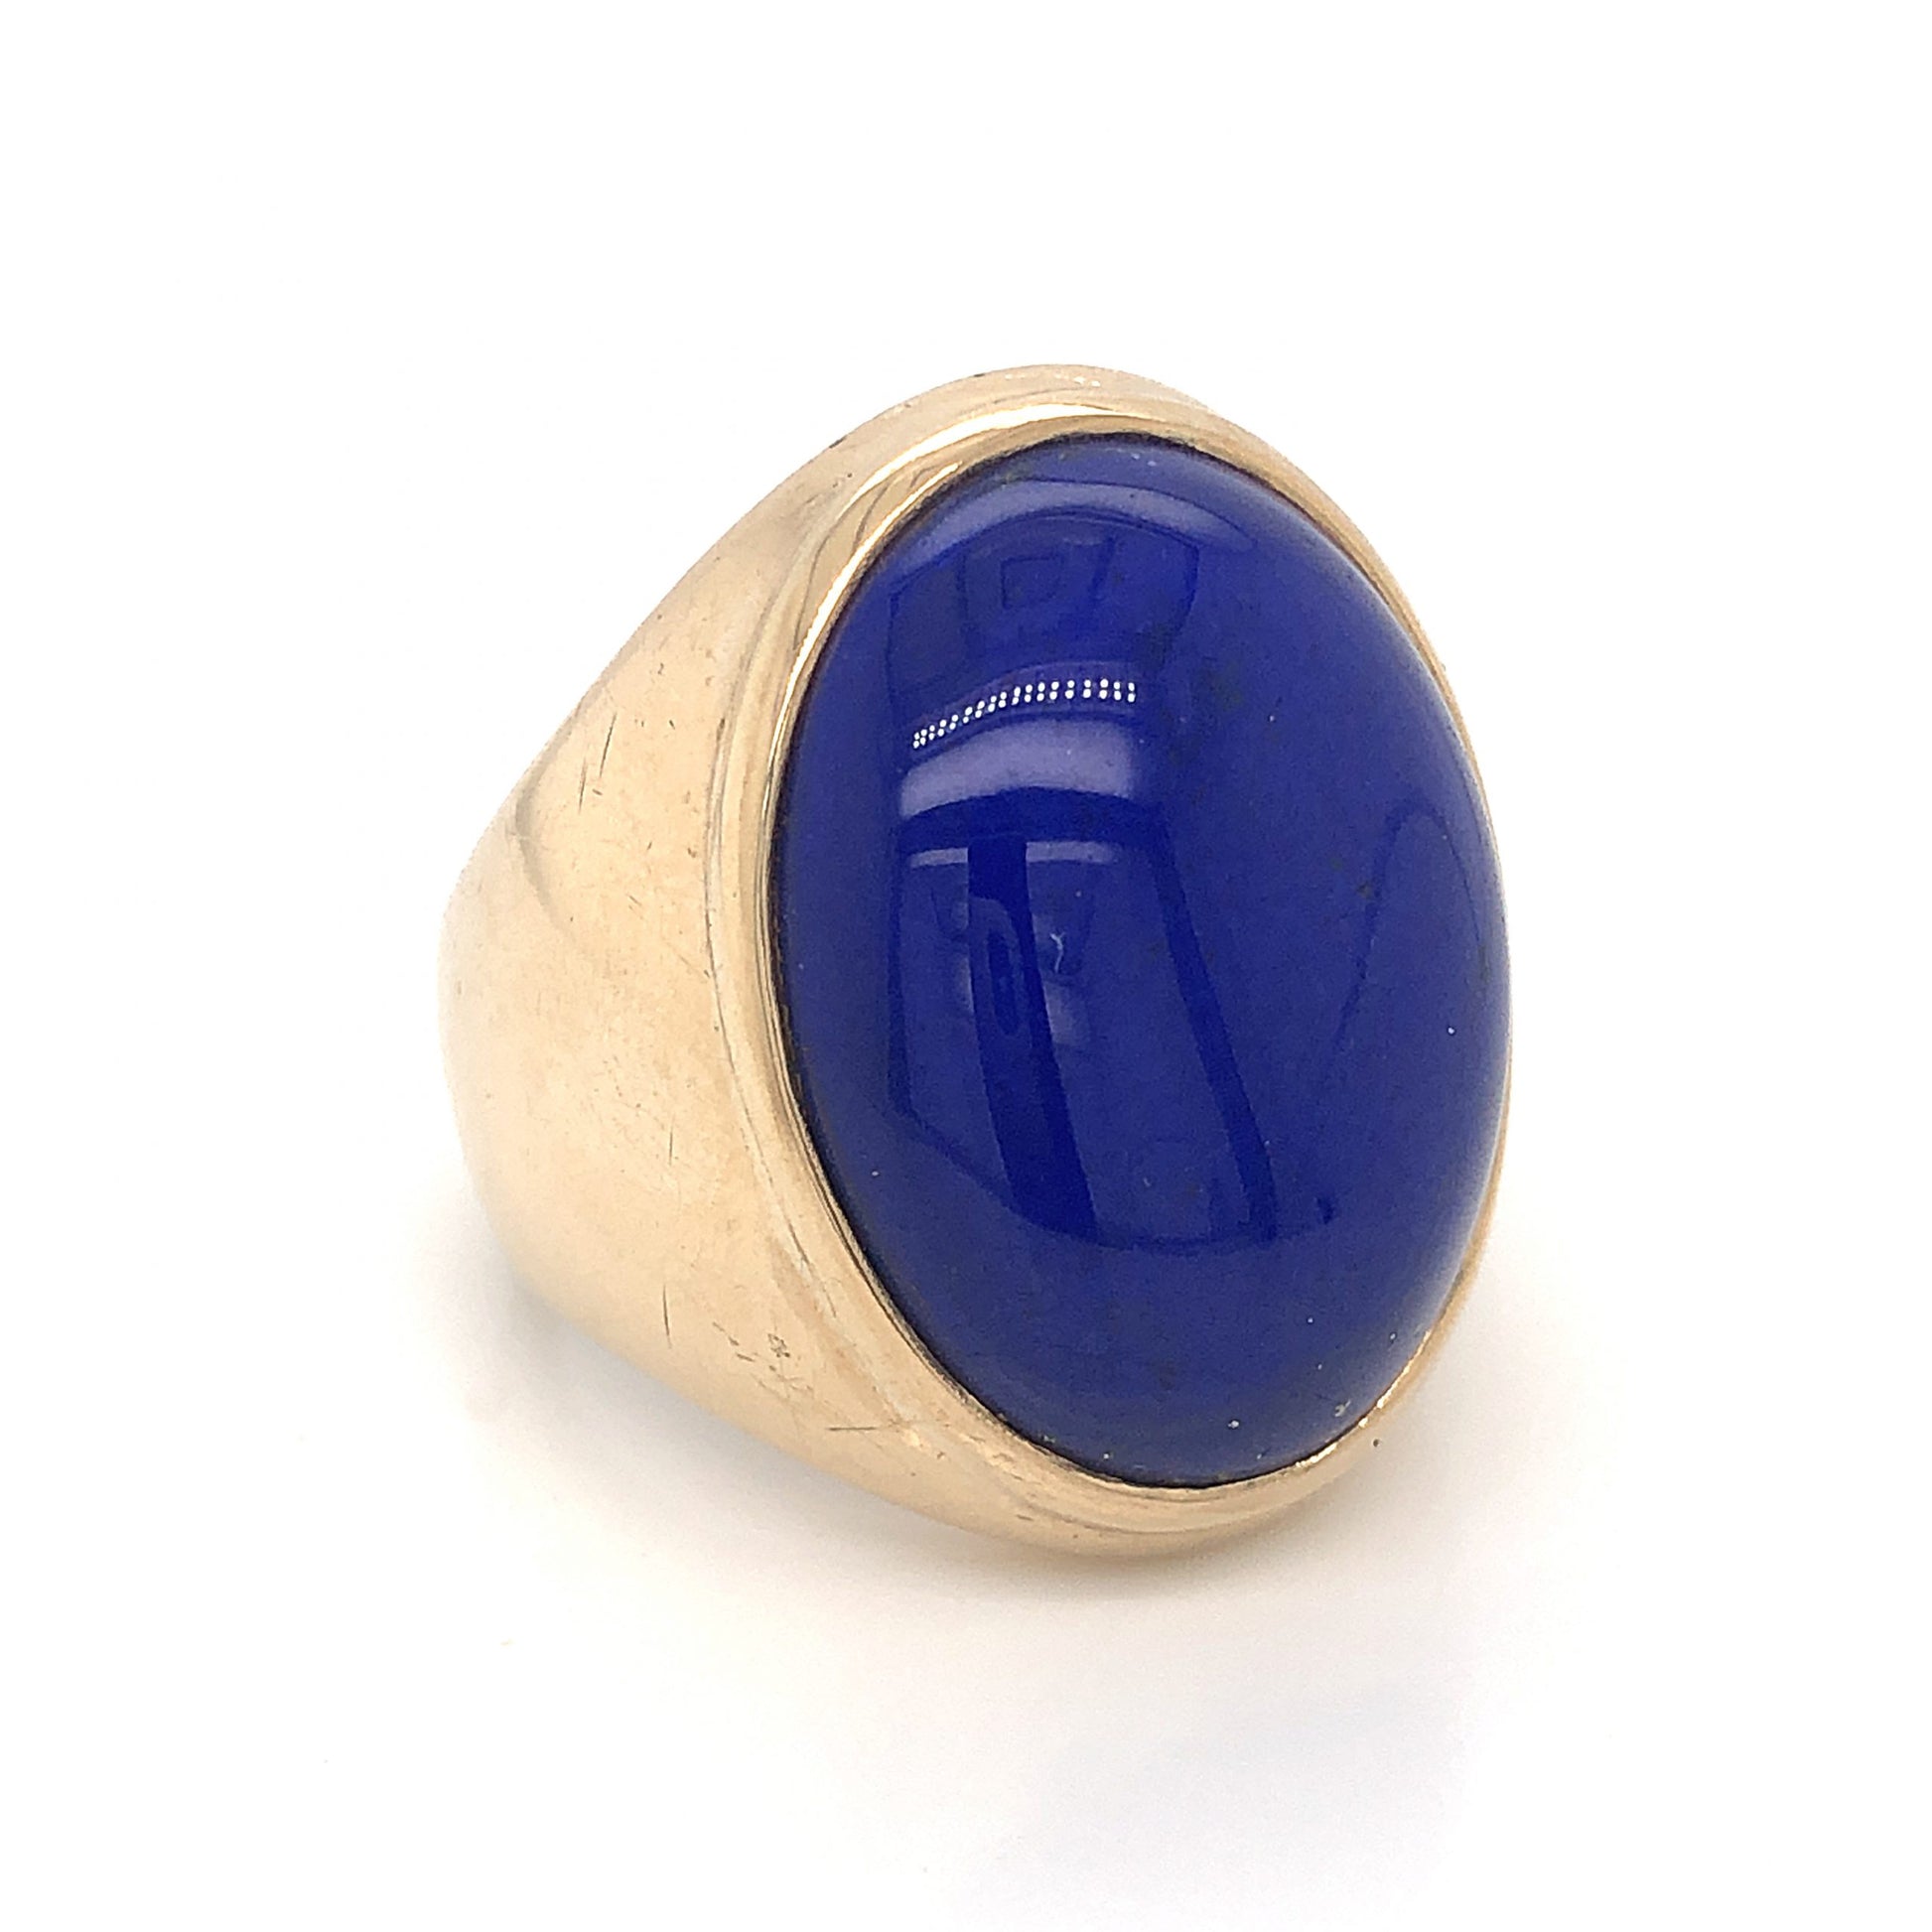 Oval Lapis Lazuli Cocktail Ring in 14k Yellow GoldComposition: 14 Karat Yellow Gold Ring Size: 9.5 Total Gram Weight: 21.1 g